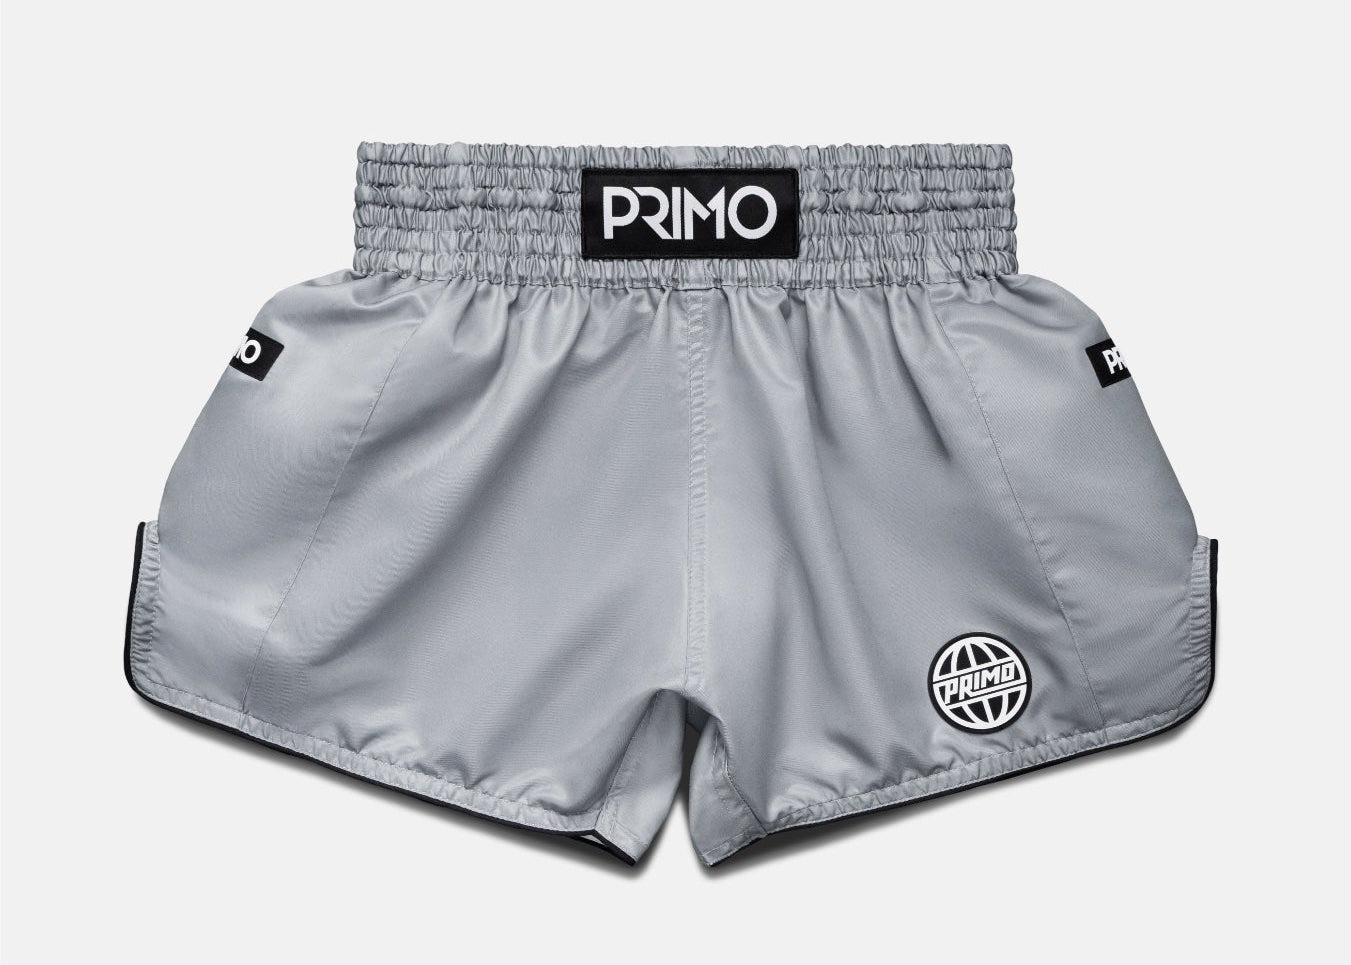 Primo Fight Wear Official Muay Thai Shorts - Alta Series - Tundra Grey